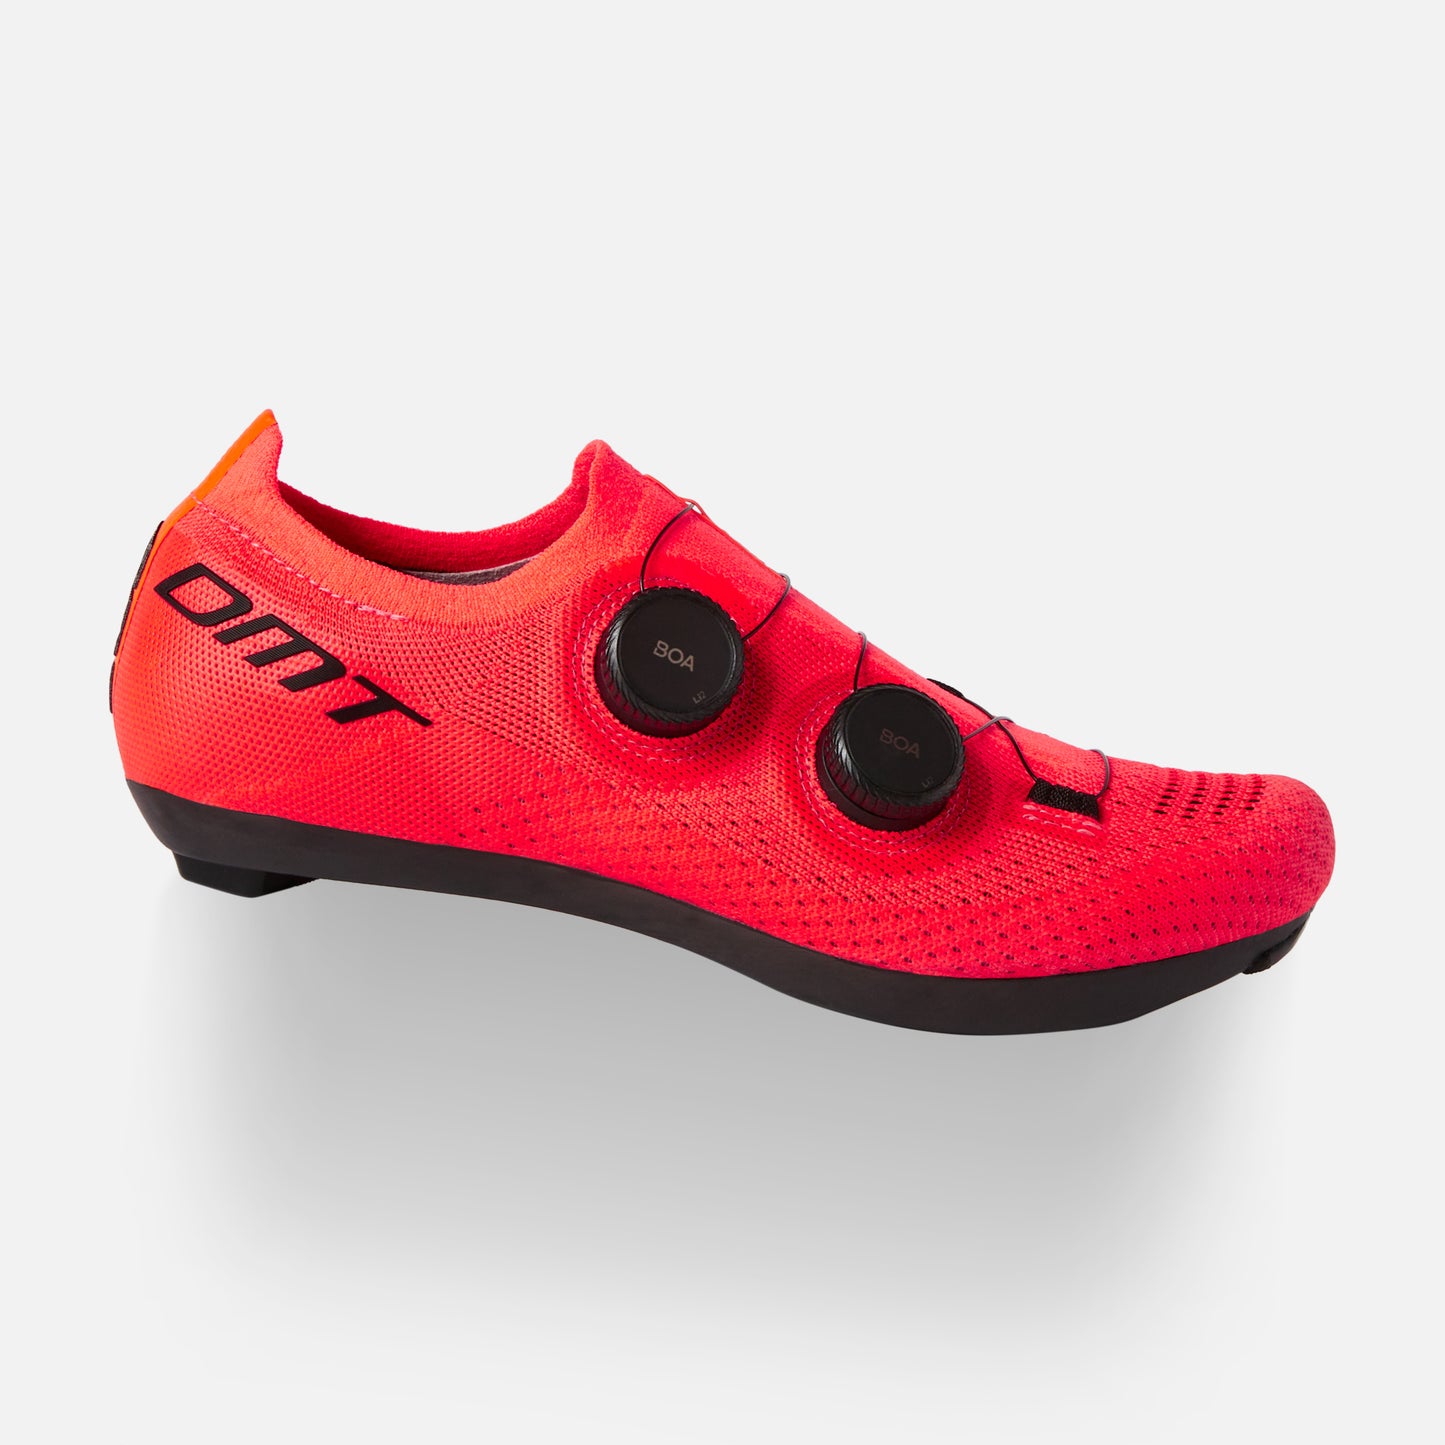 DMT Cycling - Cycling shoes: mtb, road and carbon bike shoes